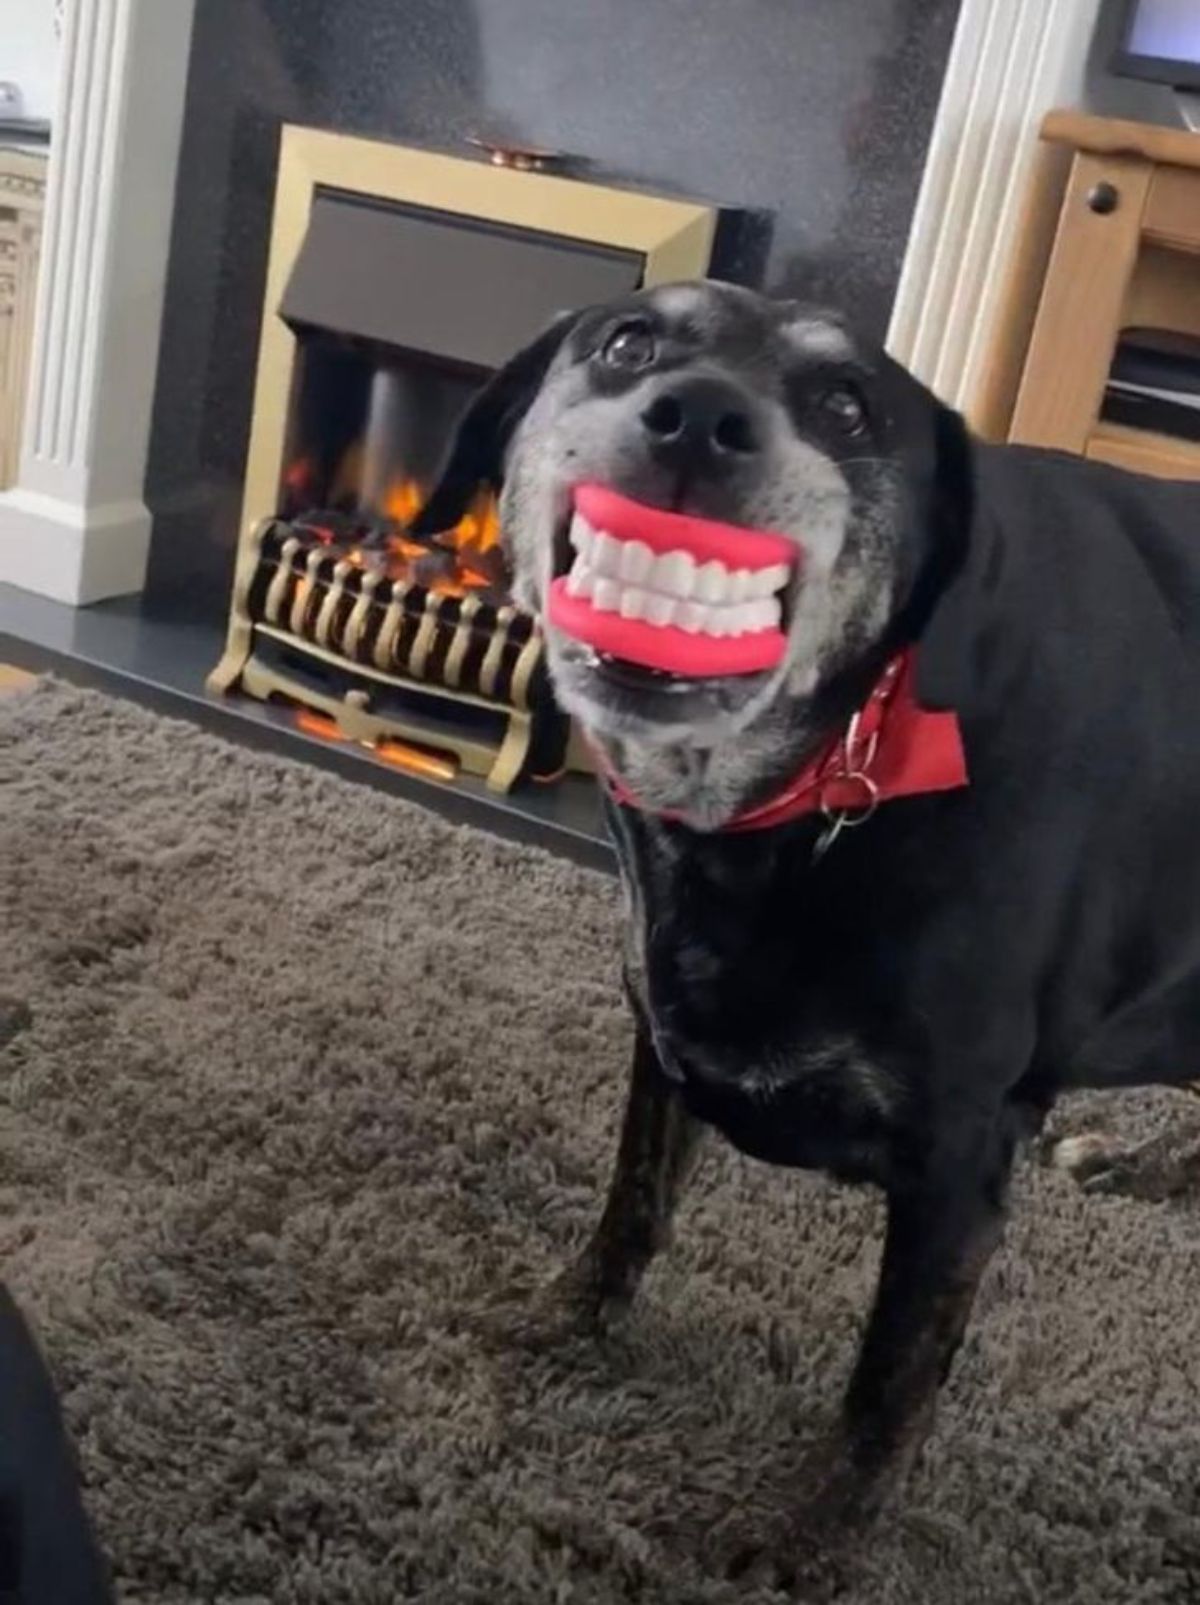 black and white dog with a toy pair of fake teeth in its mouth